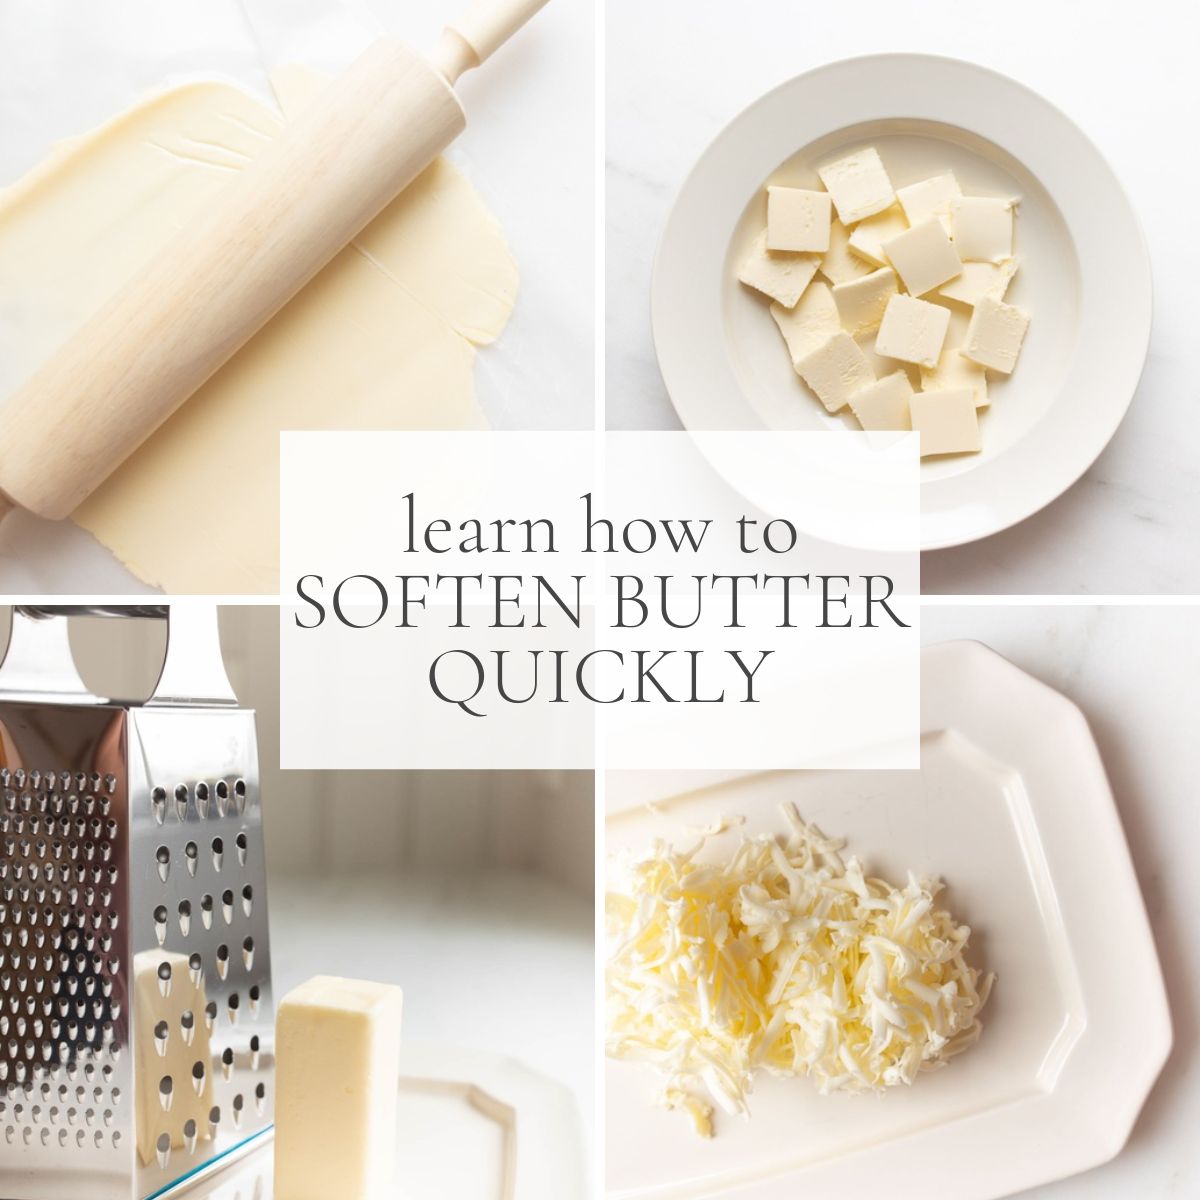 How To Soften Butter? 7 Quick-Fire Ways To Get The Work Done